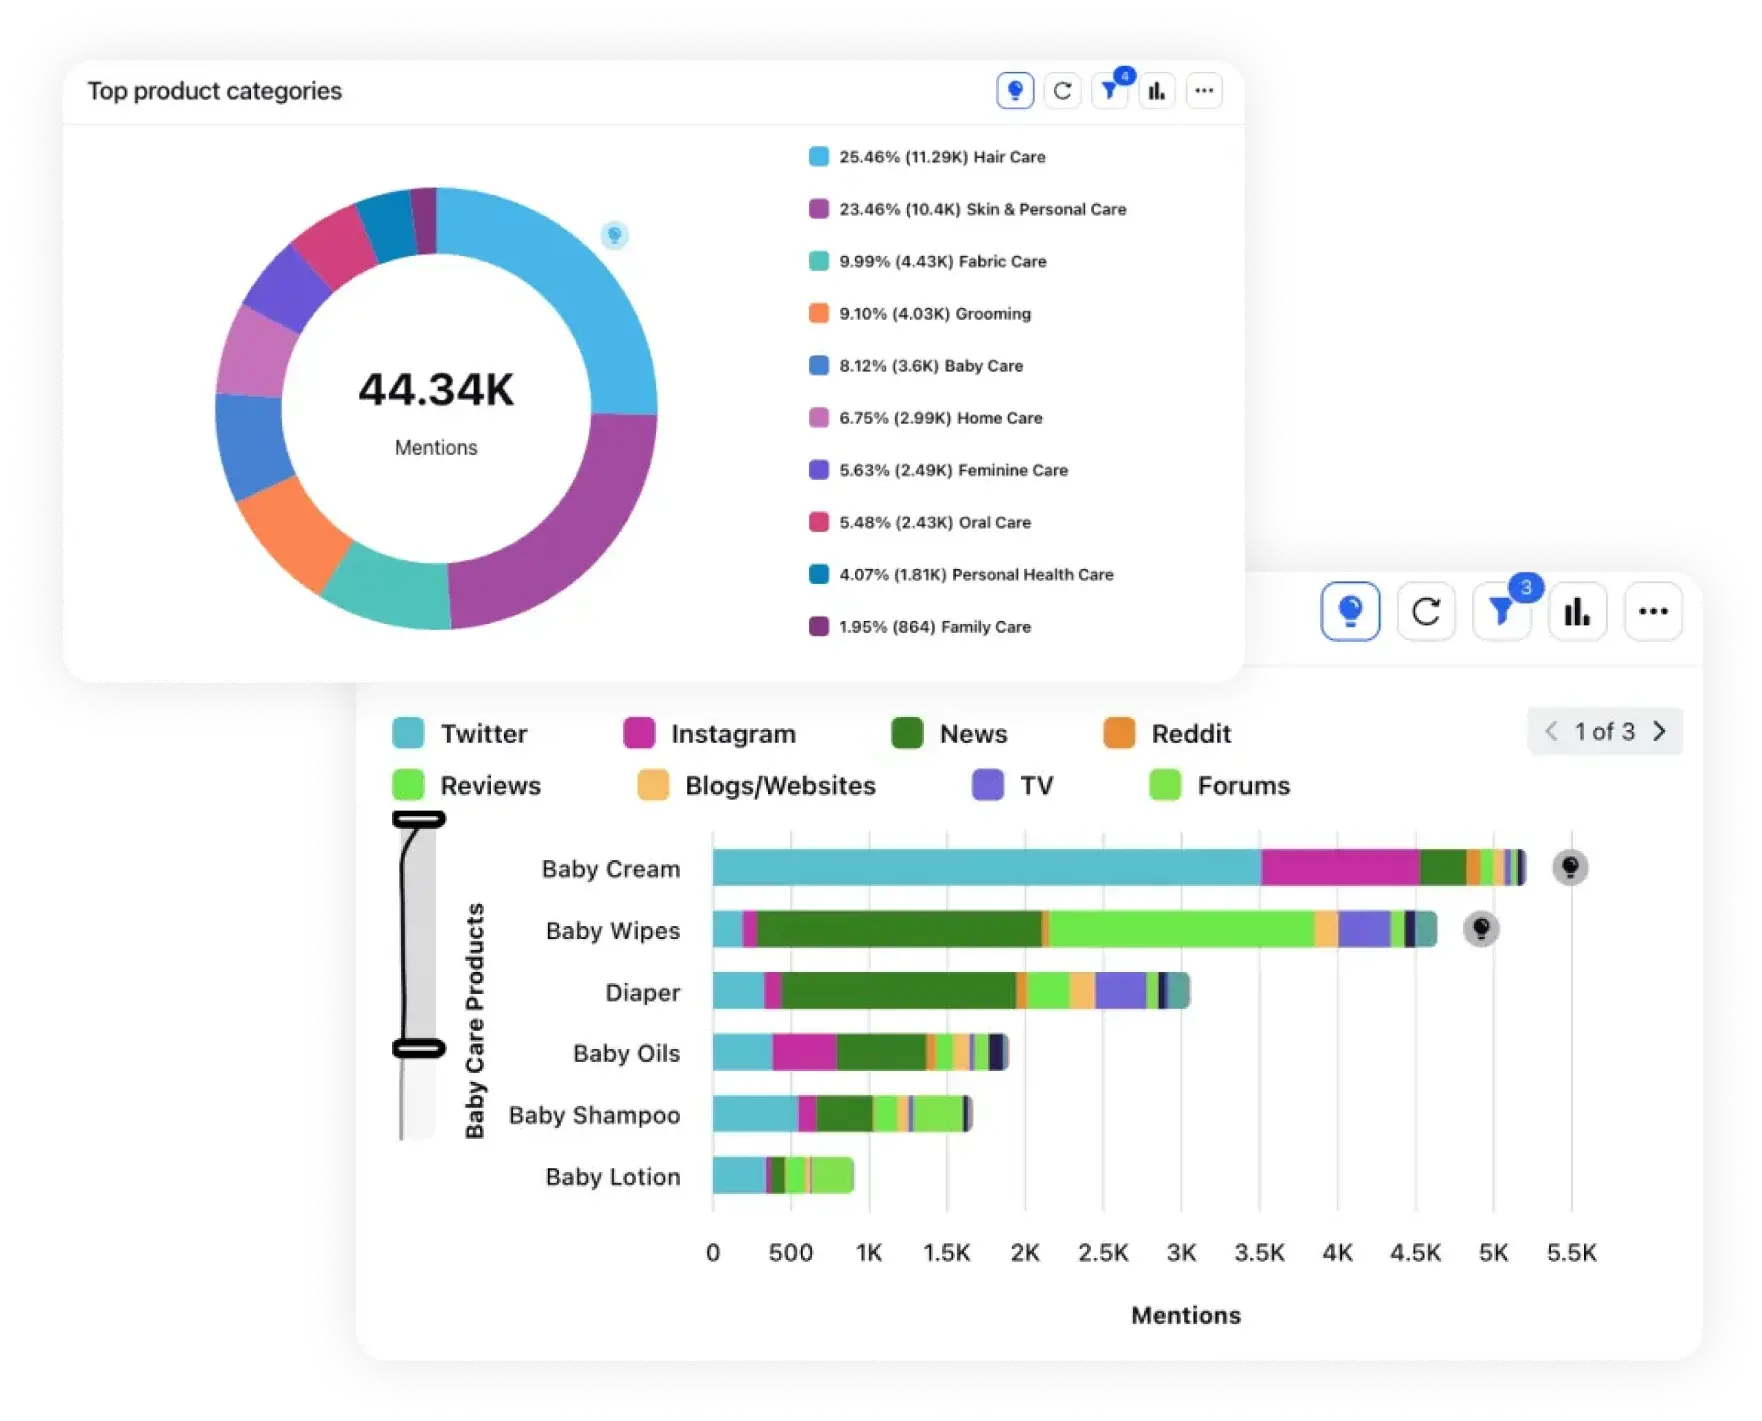 Sprinklr Product Insights dashboard for CPG brands